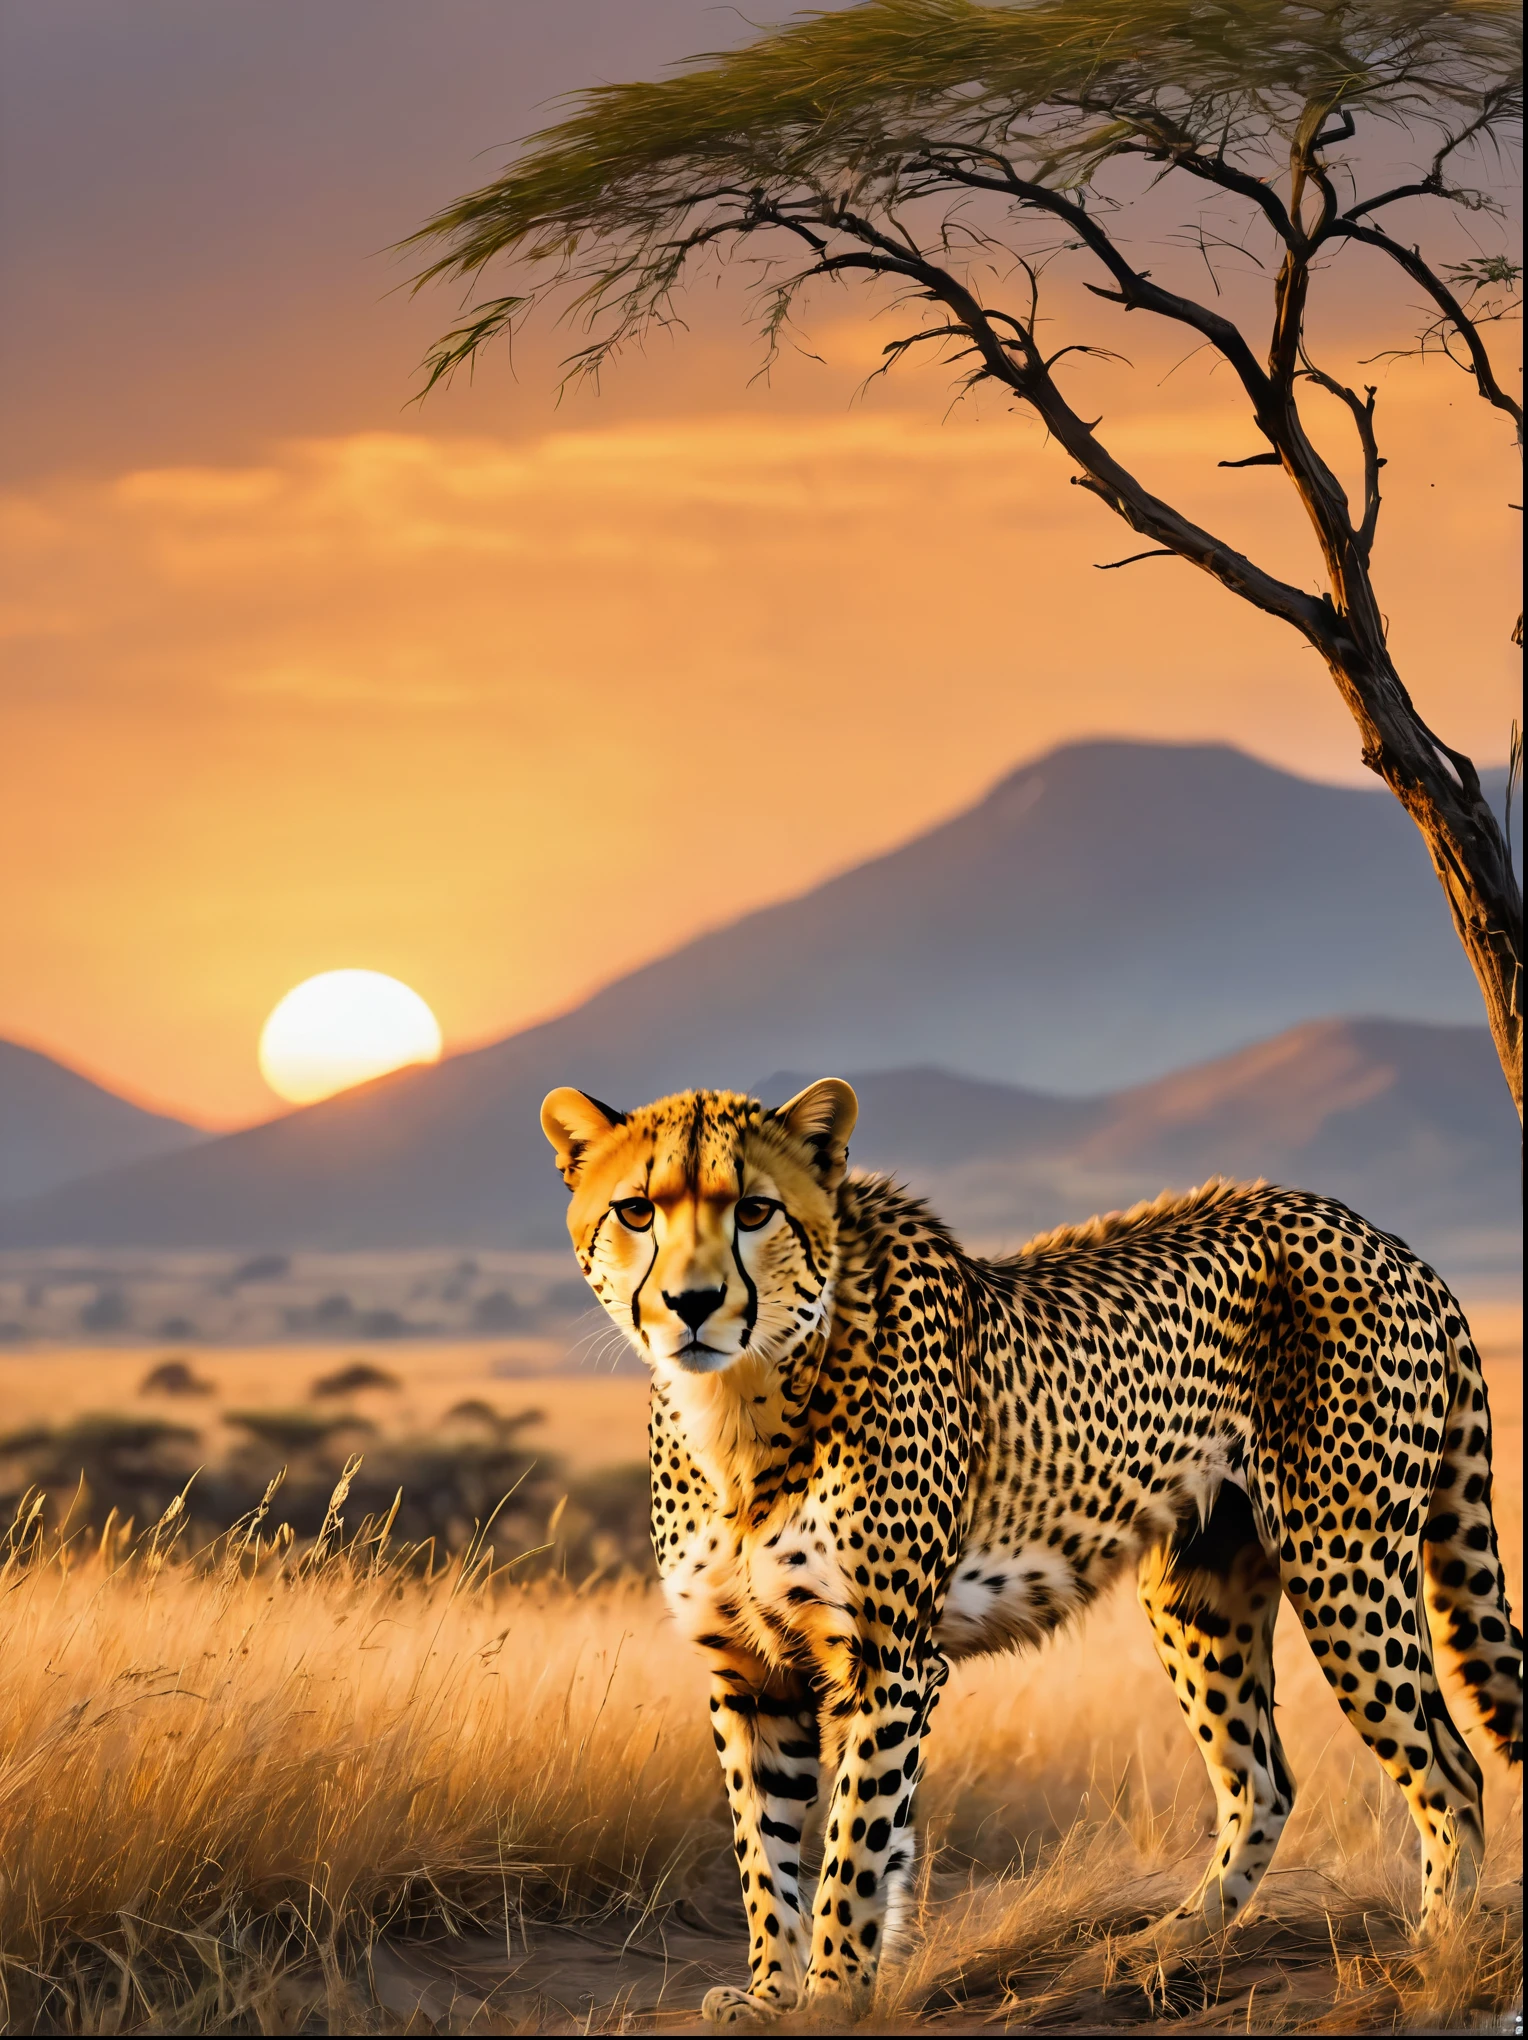 Picture a veldt bathed in the rich colours of a setting sun, Amidst the tall, golden grass, a cheetah is poised, observing its surroundings with a composed intensity befitting the fastest land animal. Its lean muscular body, sleek coat peppered with distinctive black spots glimmering in the dying light of the day, showcases its magnificent adaptation for speed, Tufts of whiskers flicker over a sharp, focused gaze, an embodiment of fierce gracefulness, The backdrop completes this scene with acacia trees dotting the veldt, rolling hills in the distance, and an orange-tinted sky